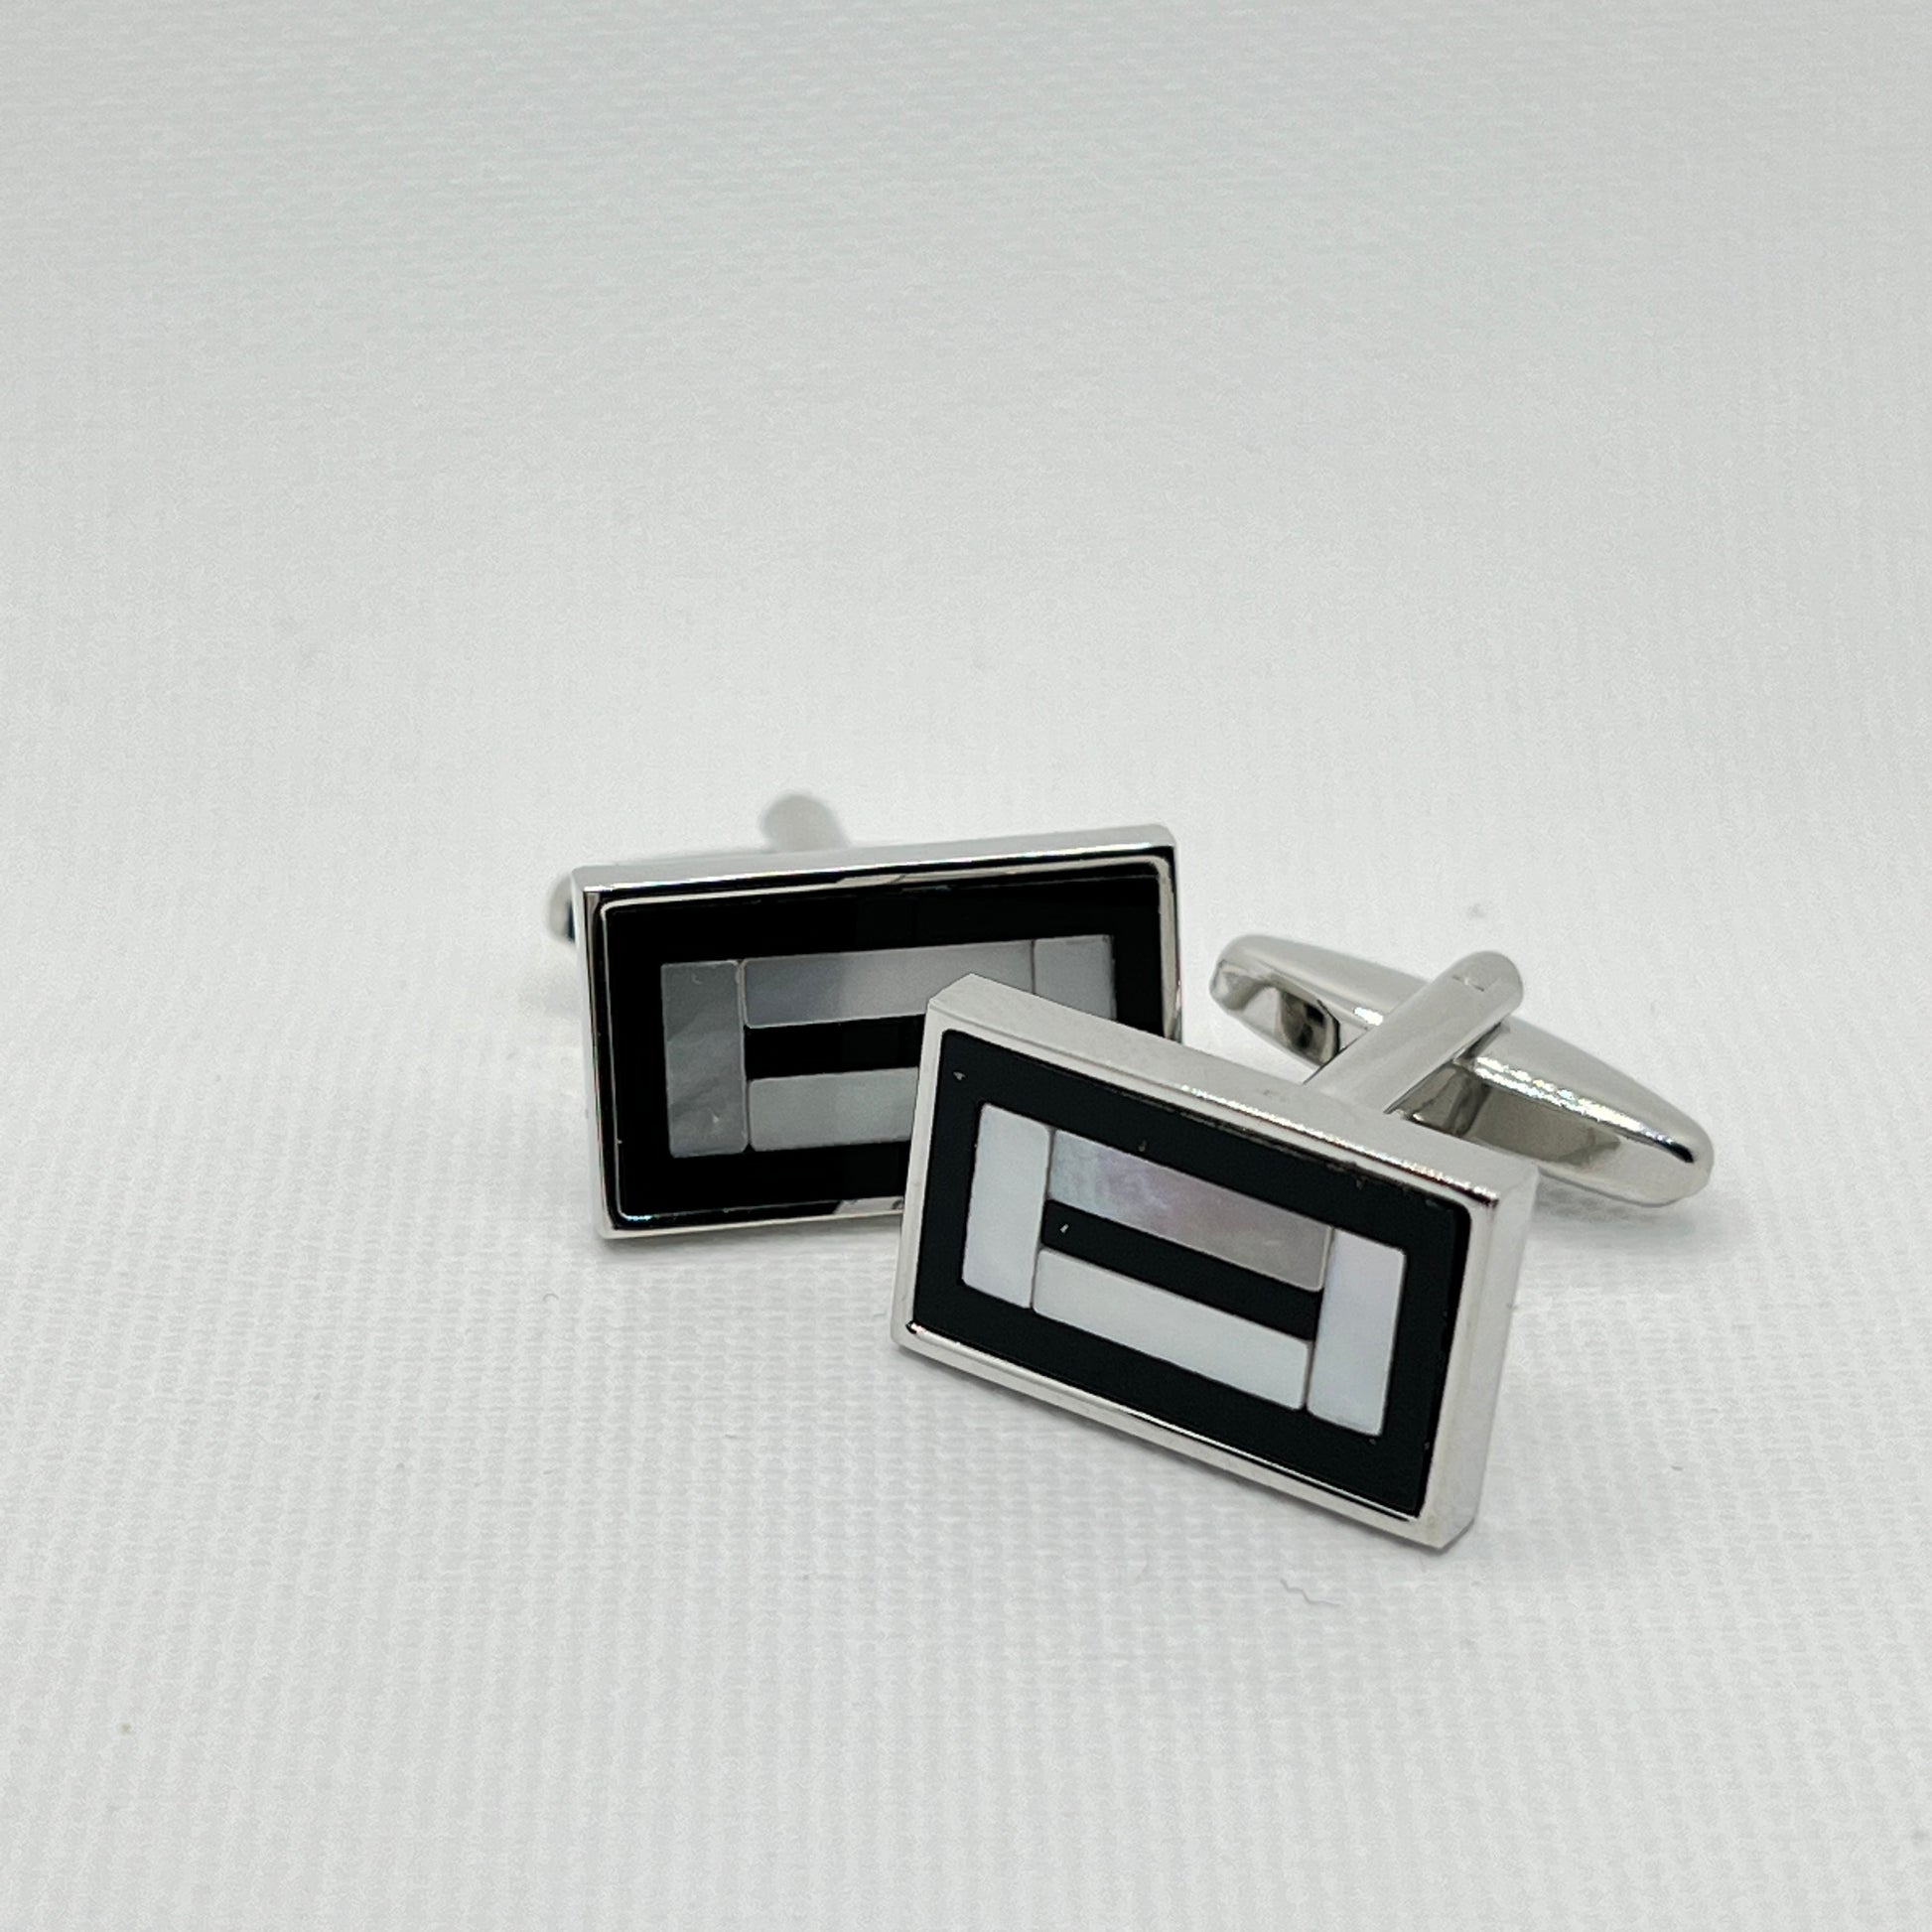 Tasker & Shaw | Luxury Menswear | Oblong cufflinks with black & mother of pearl inlayed pattern